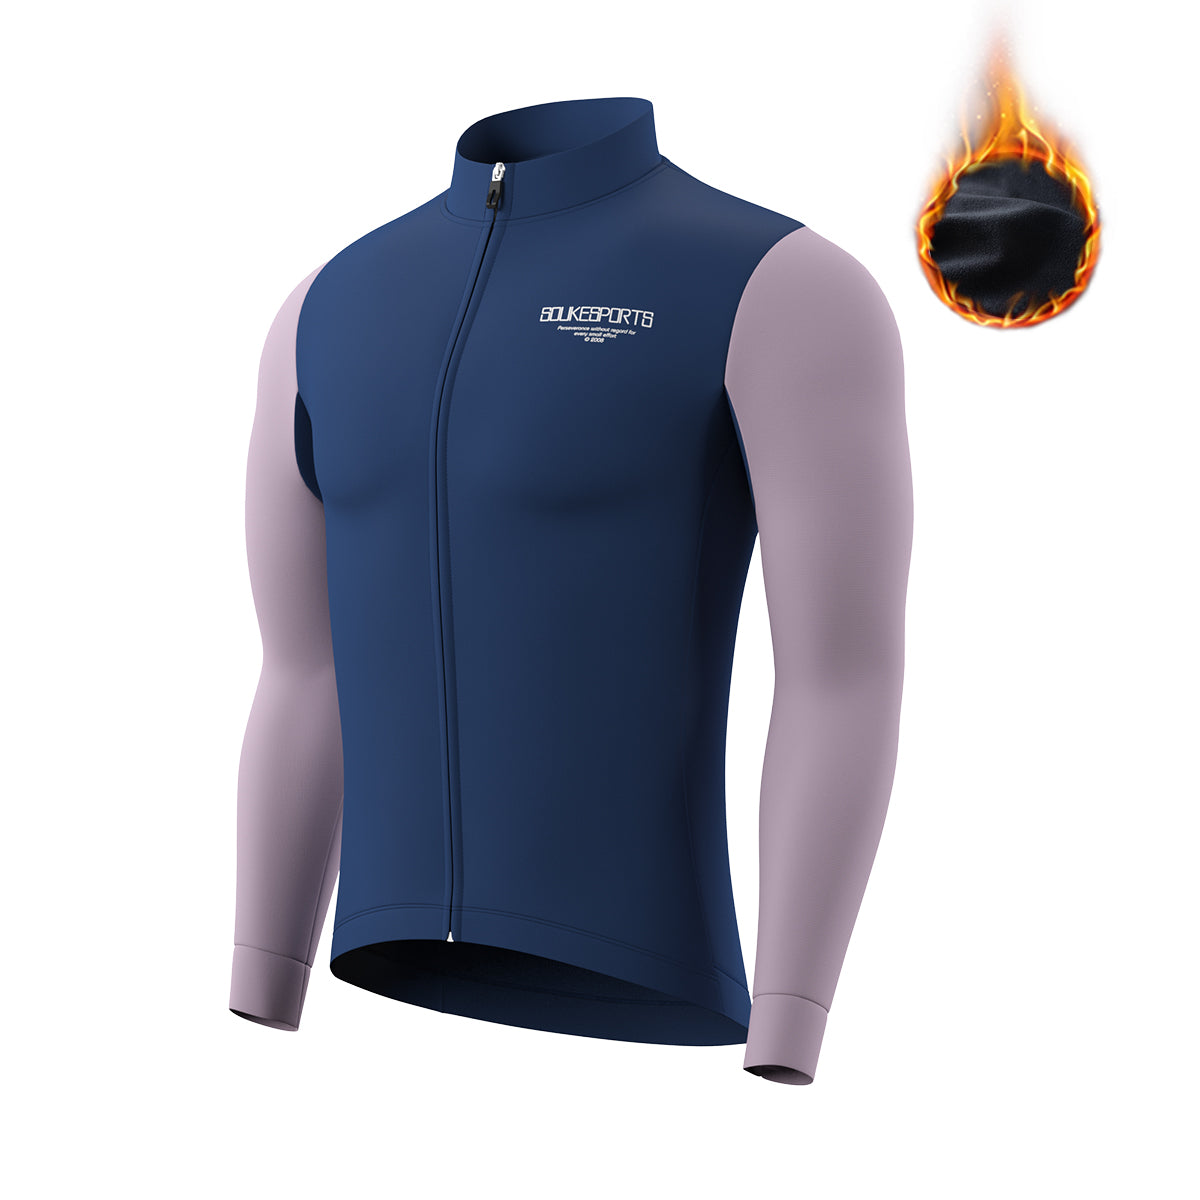 cycling long-sleeve jersey, Graphene jersey, jersey for winter, blue long jersey, jersey for winter and autumn, cold weather jersey.